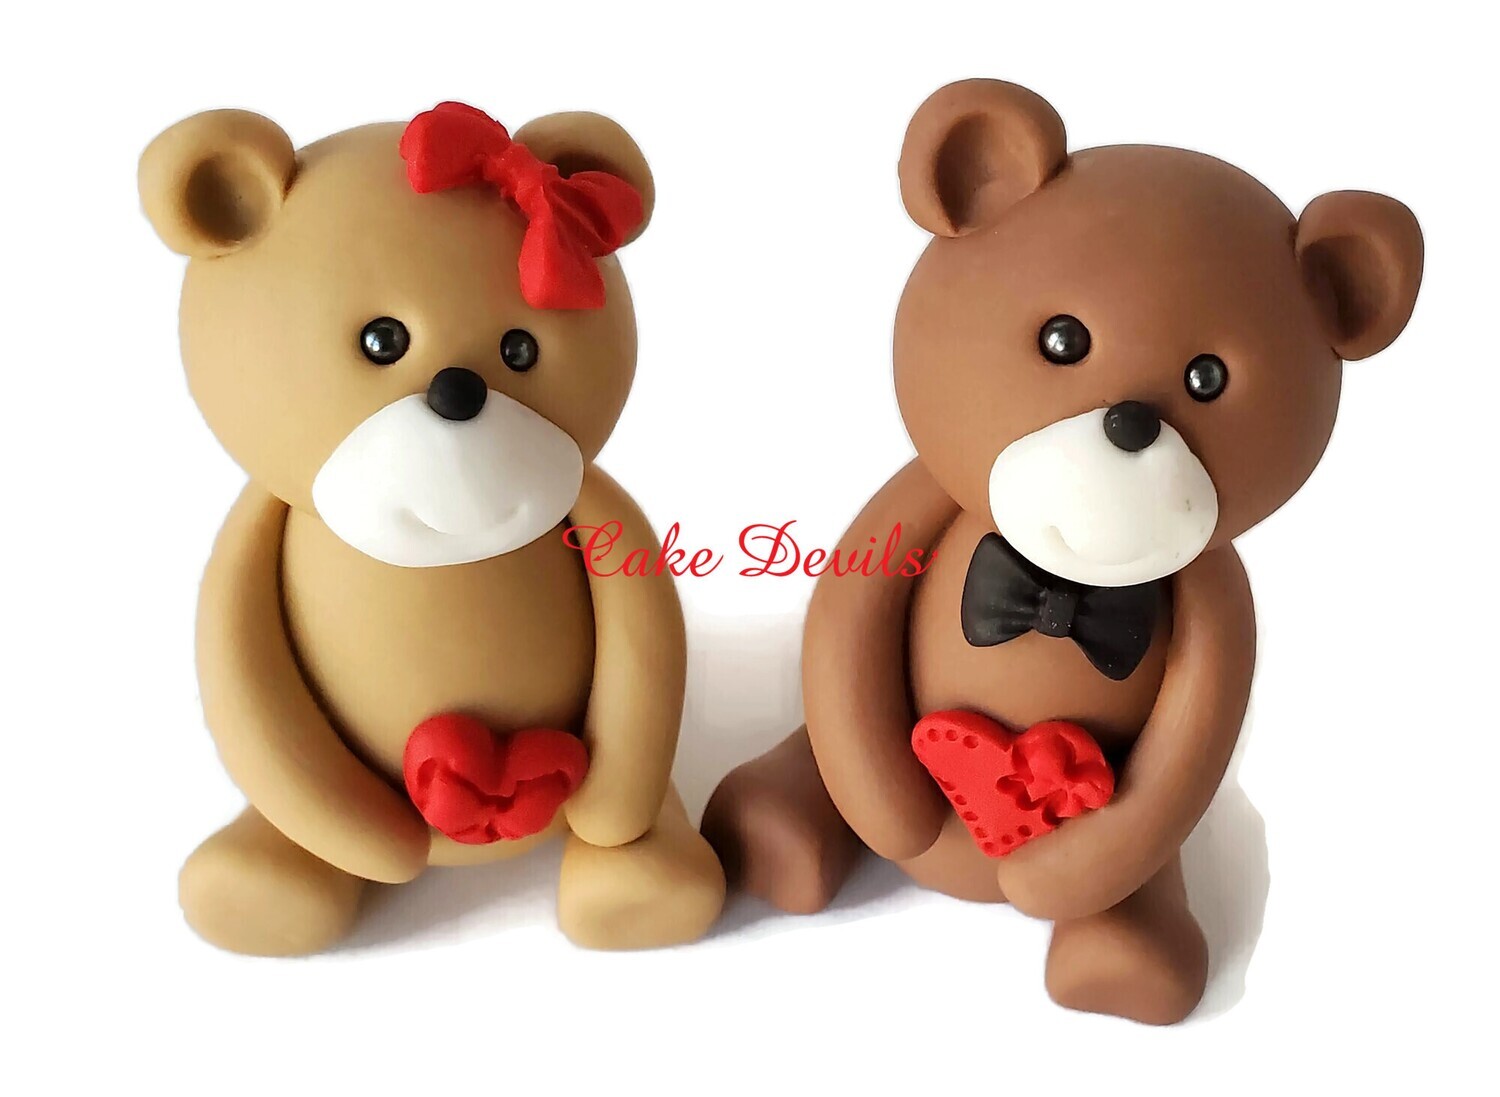 Fondant Valentine's Day Teddy Bear Cake Toppers, Also great for Baby Shower, Birthday and more!